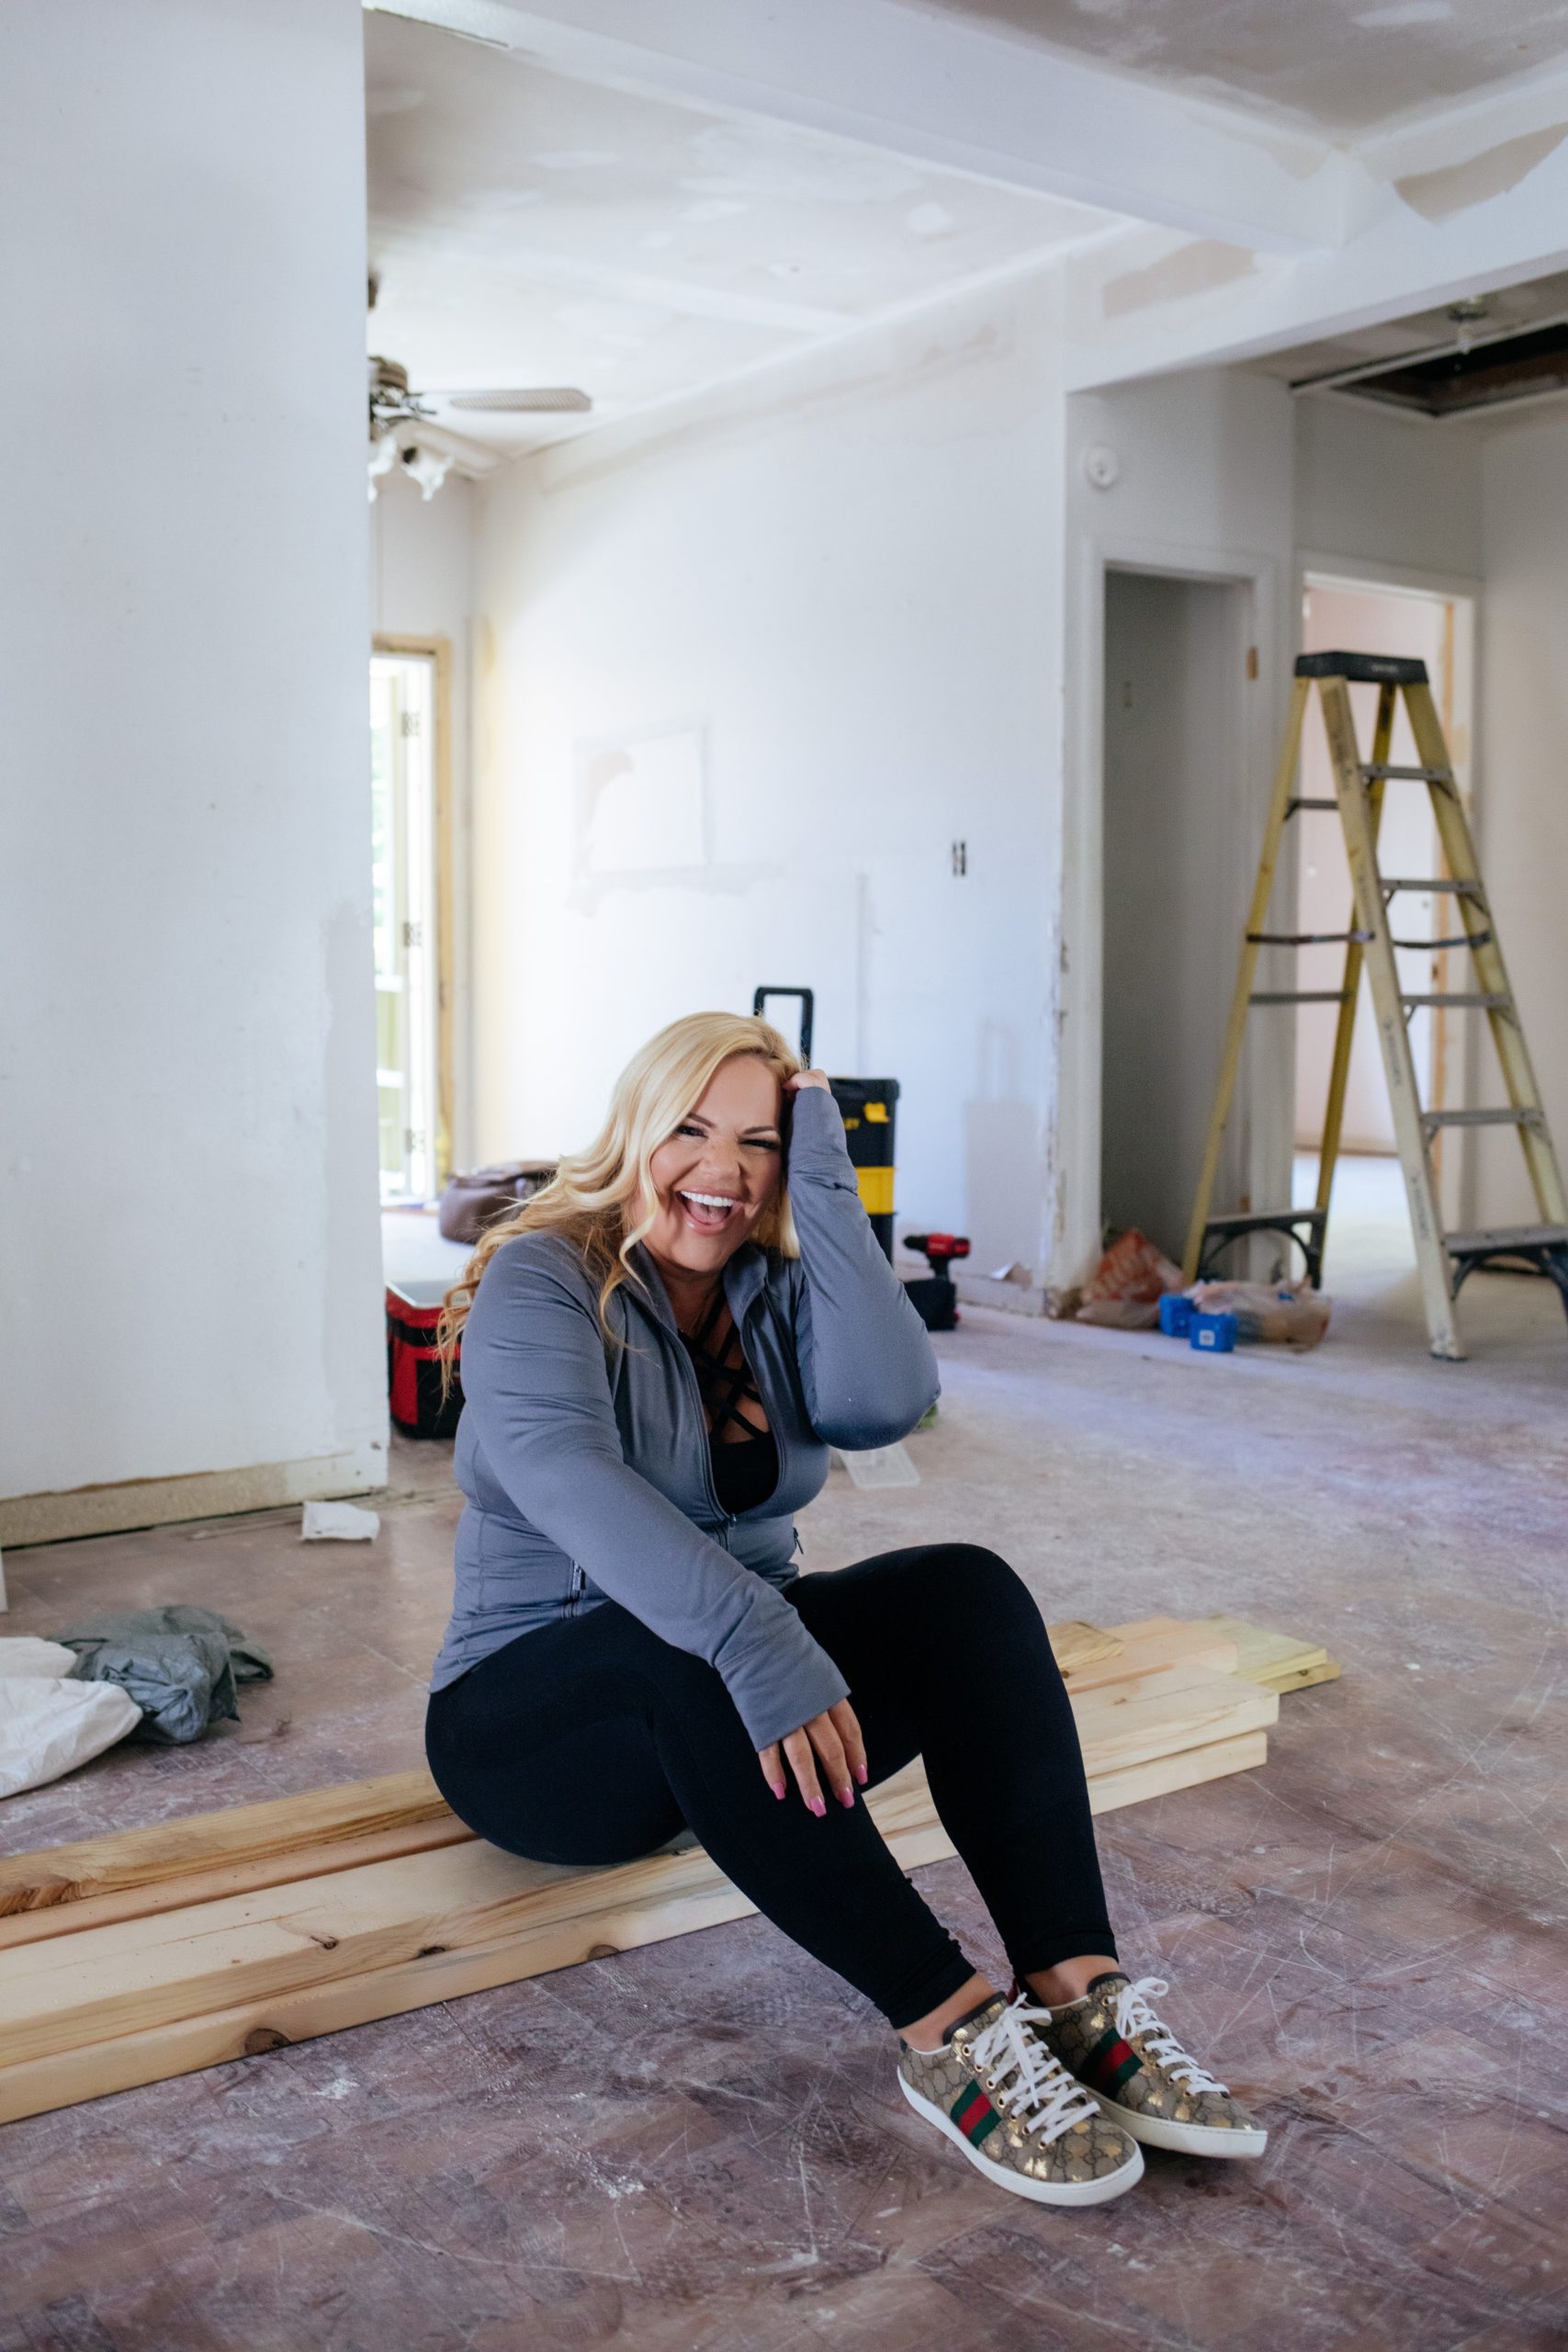 Florida Real Estate Investor and Interior Designer Christine Smith. Click here to get inspired by this firecracker's branding photoshoot!